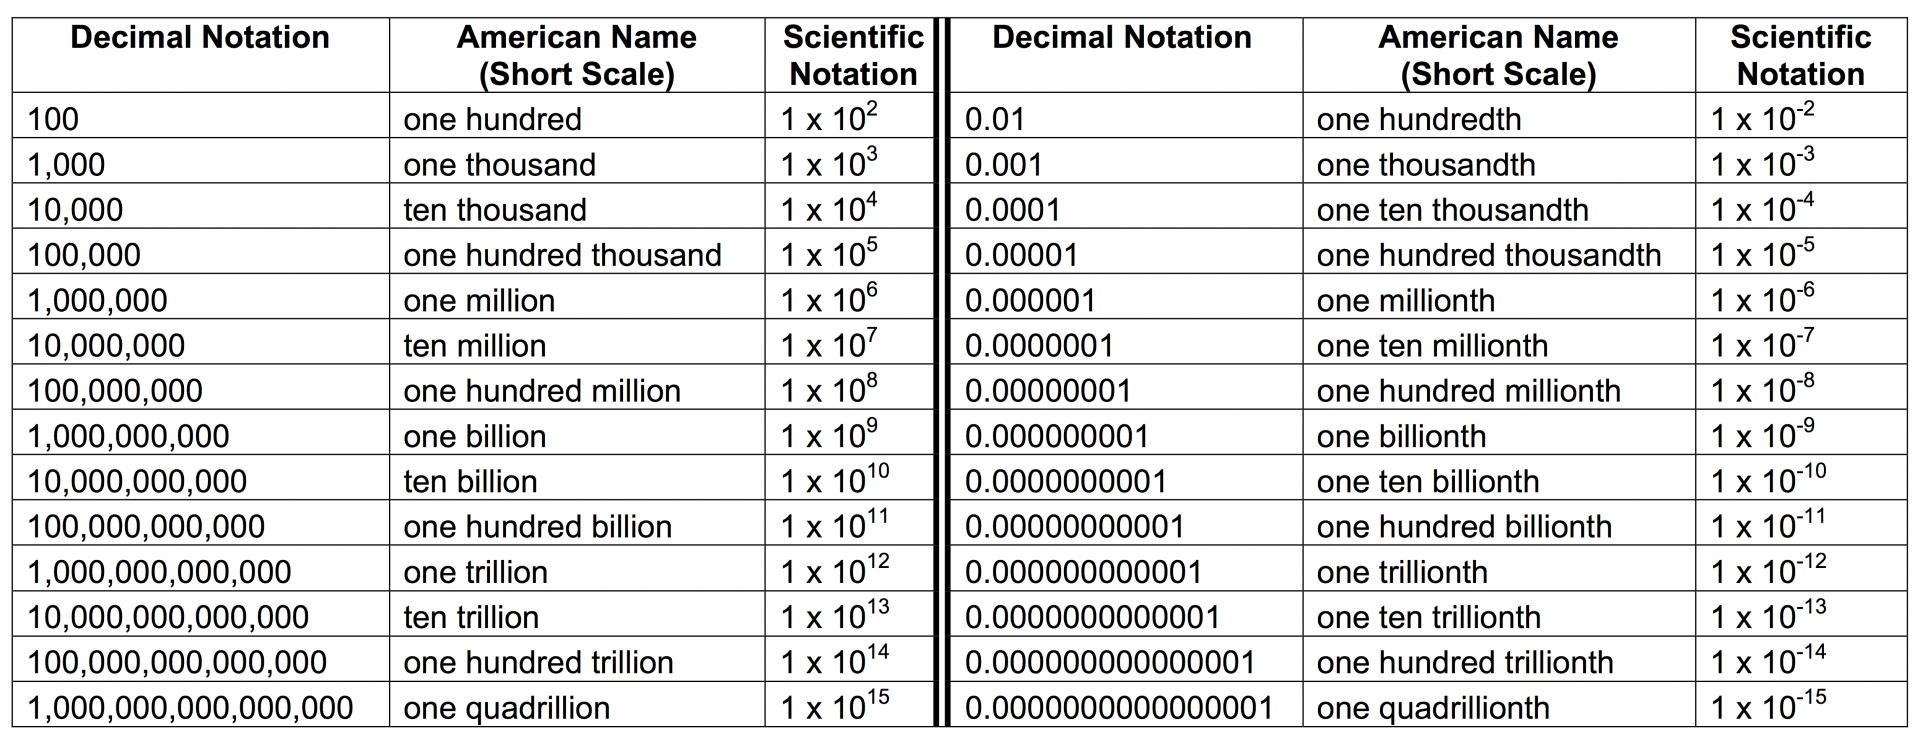 scientificnotationtable.png